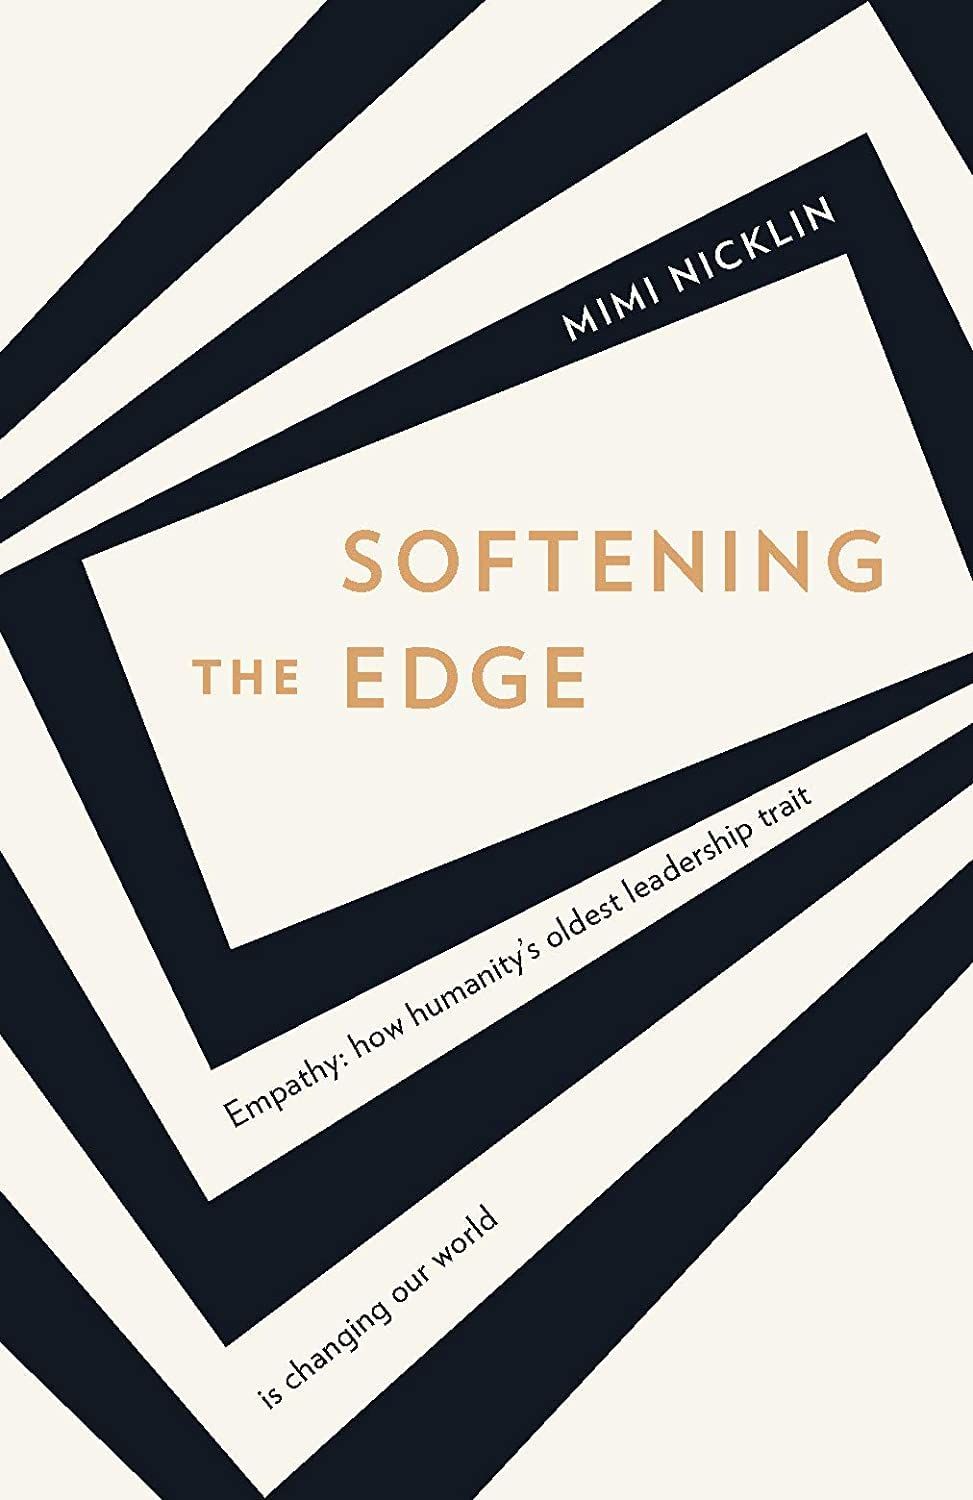 Softening the Edge: Empathy: how humanity's oldest leadership trait is changing our world